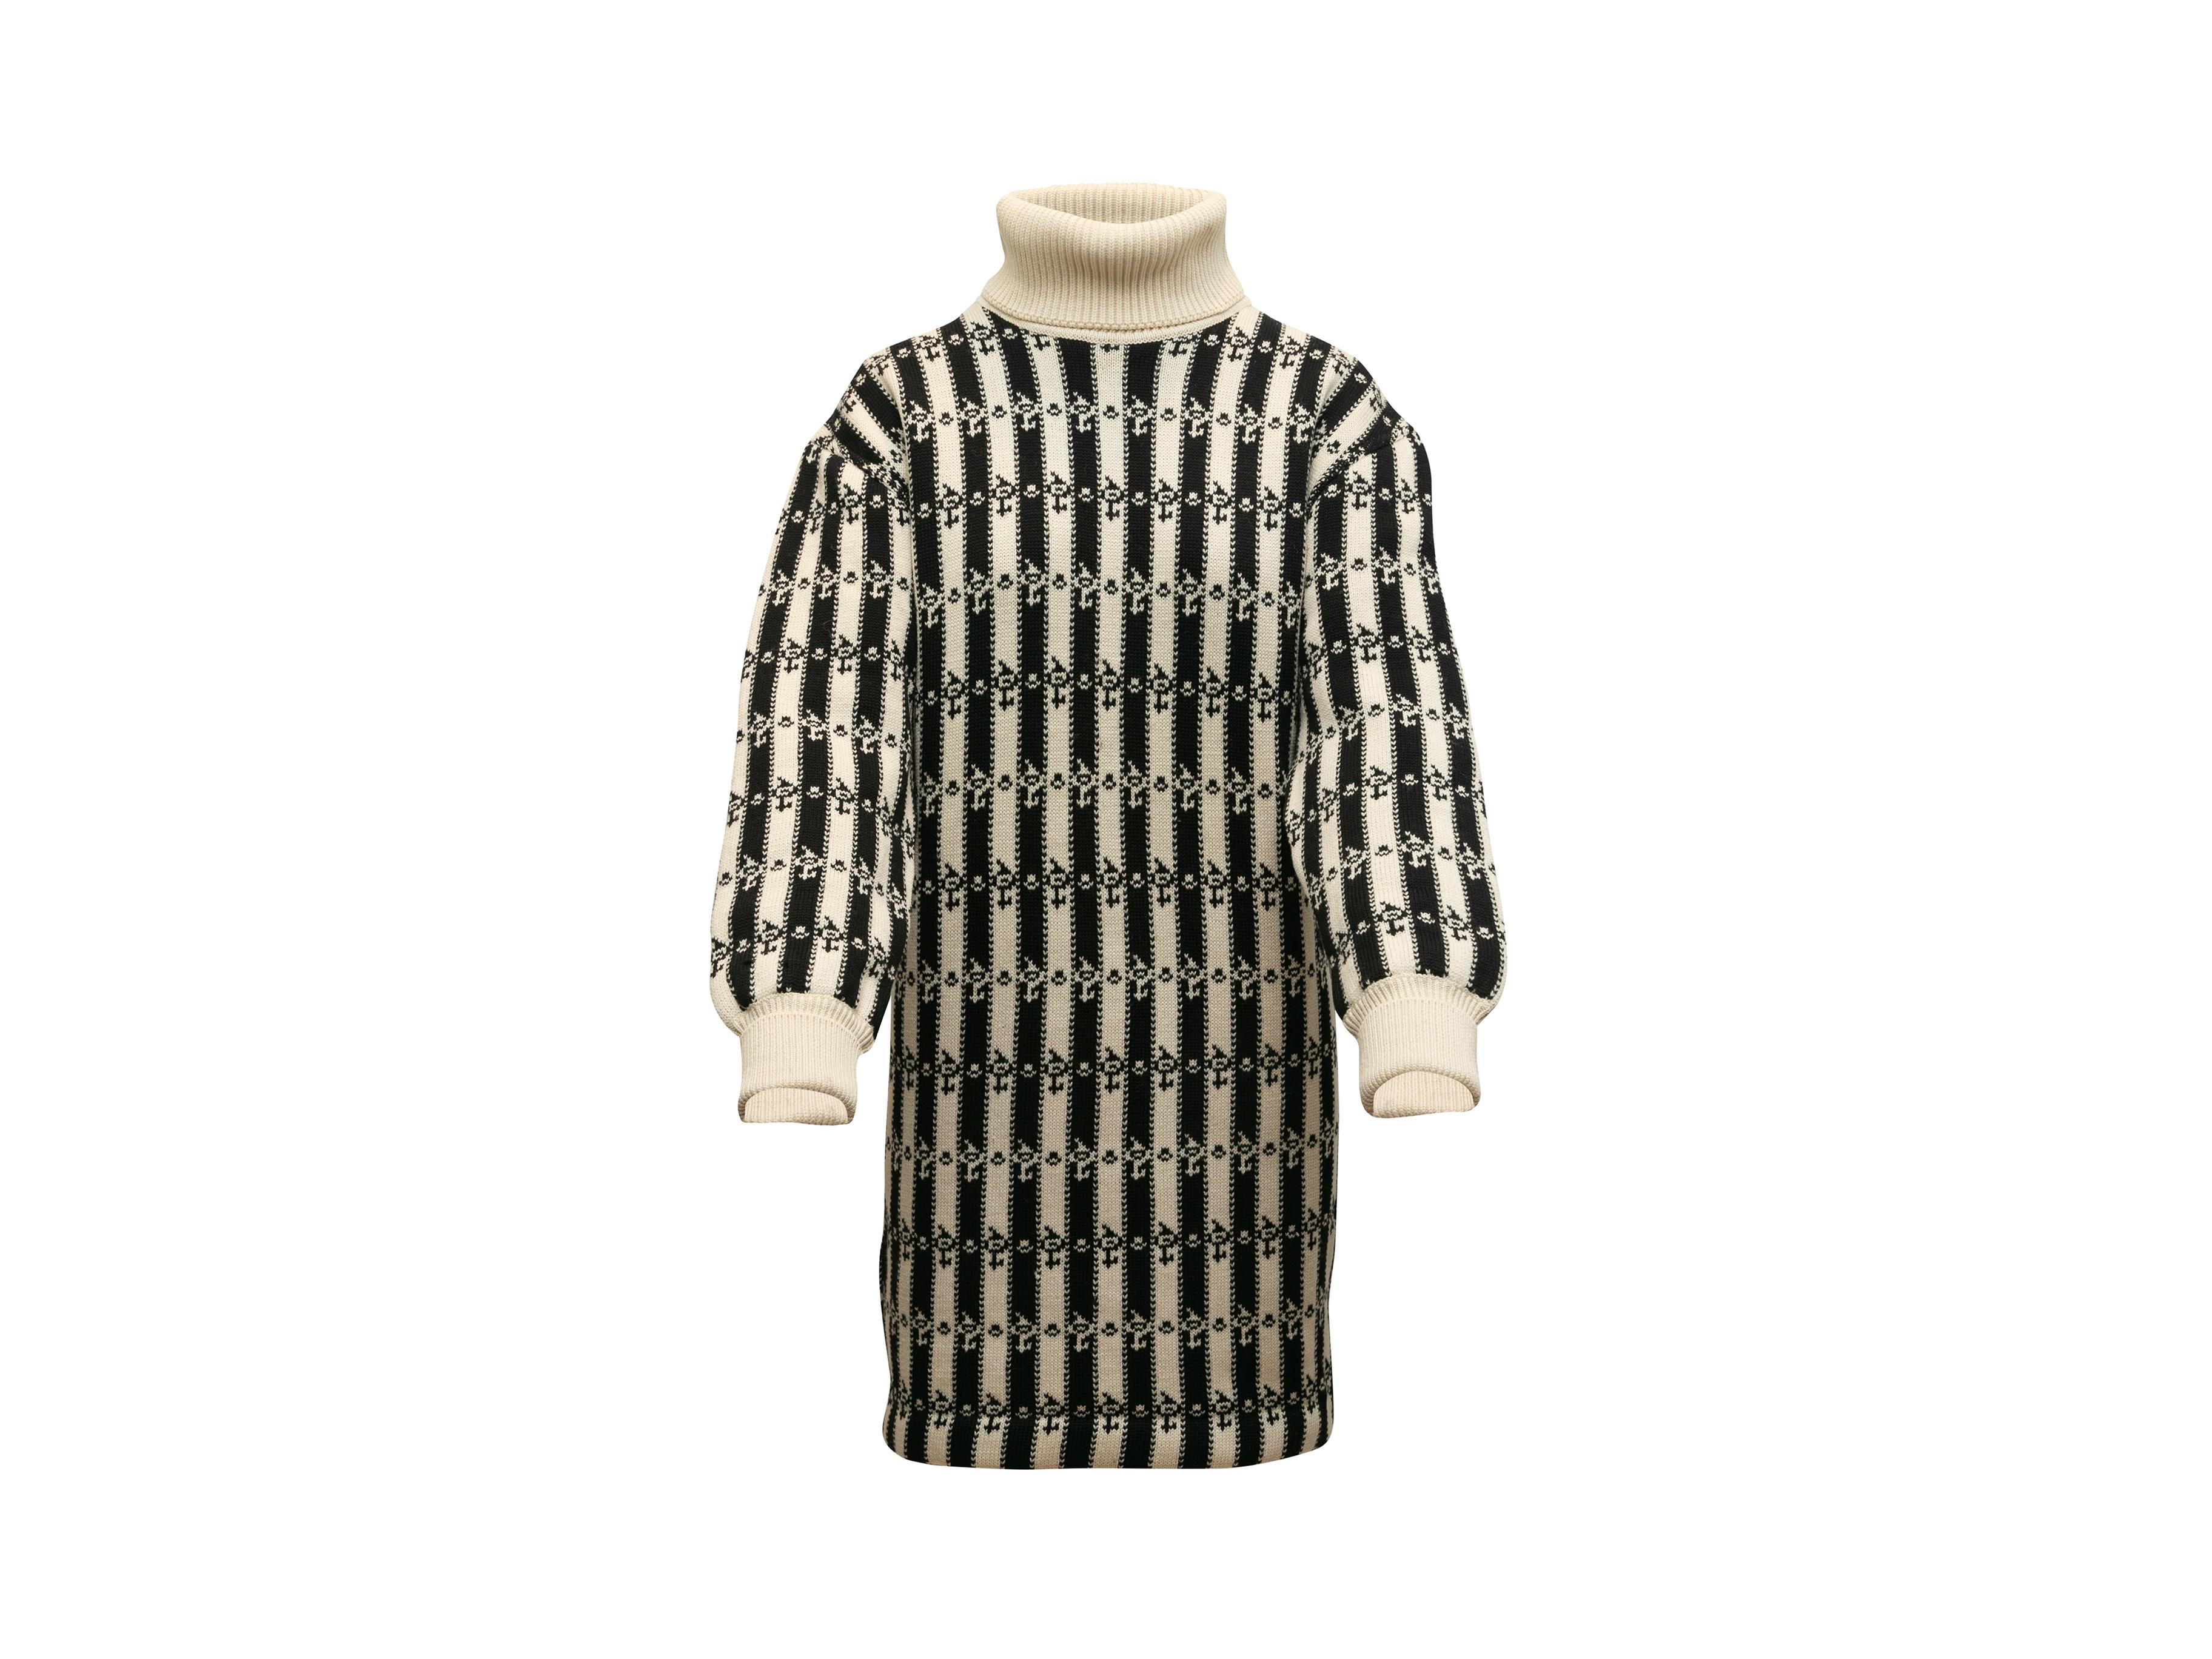 Product details: Vintage white and black merino wool striped sweater dress by Chanel Boutique. Turtleneck. Long sleeves. Designer size 38. 40